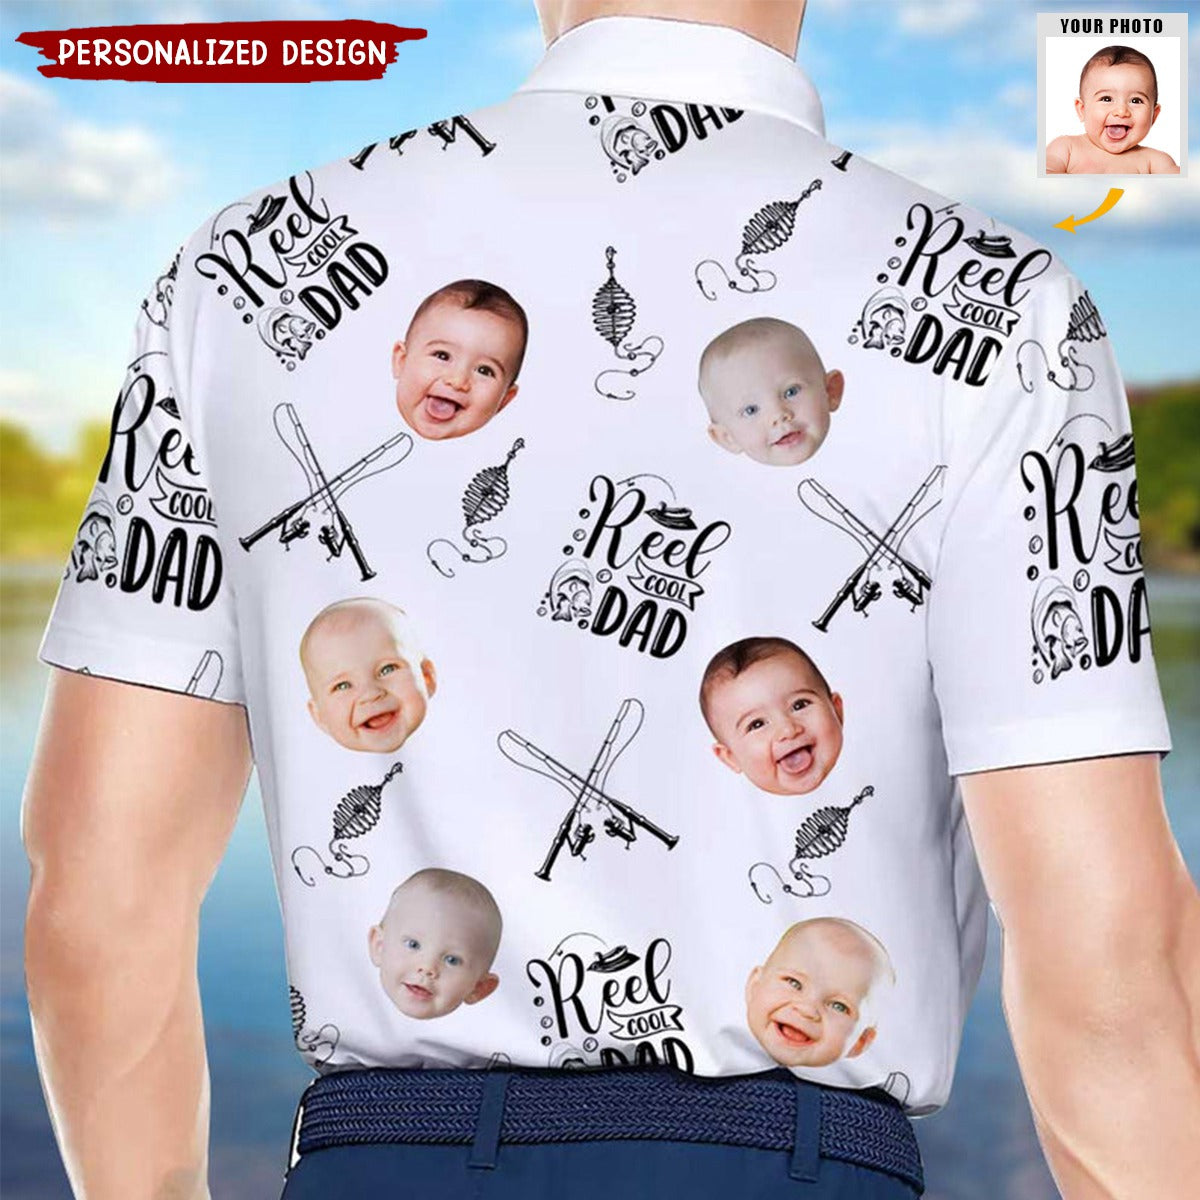 Reel Cool Dad Upload Photo Personalized Polo Shirt